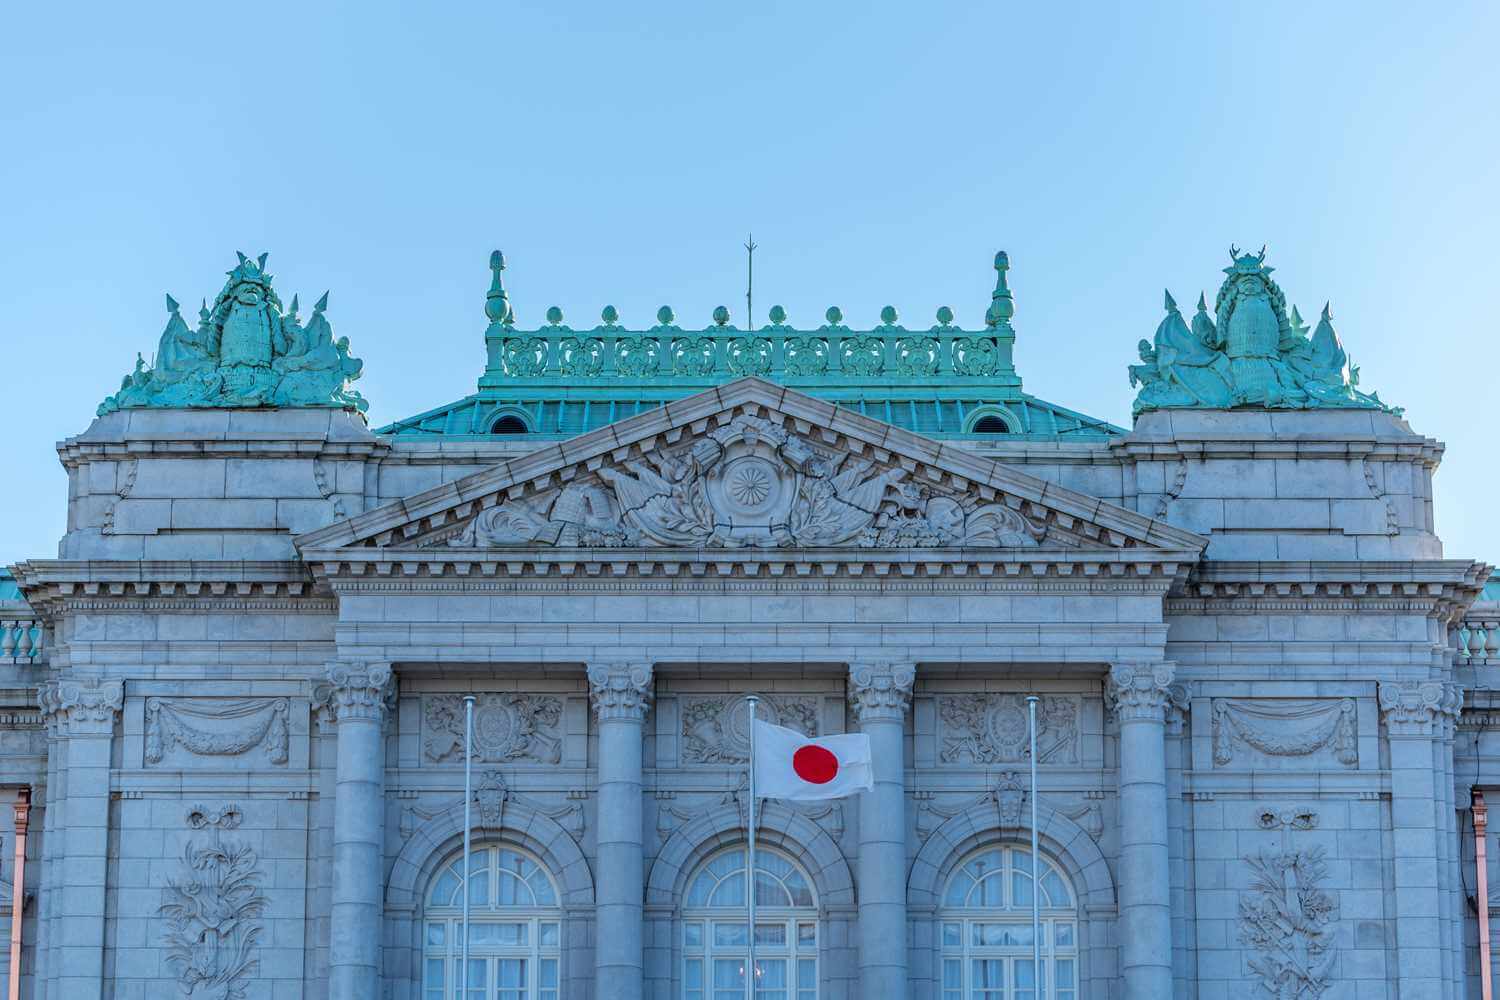 Photos: The State Guest House (Akasaka Palace) in Tokyo